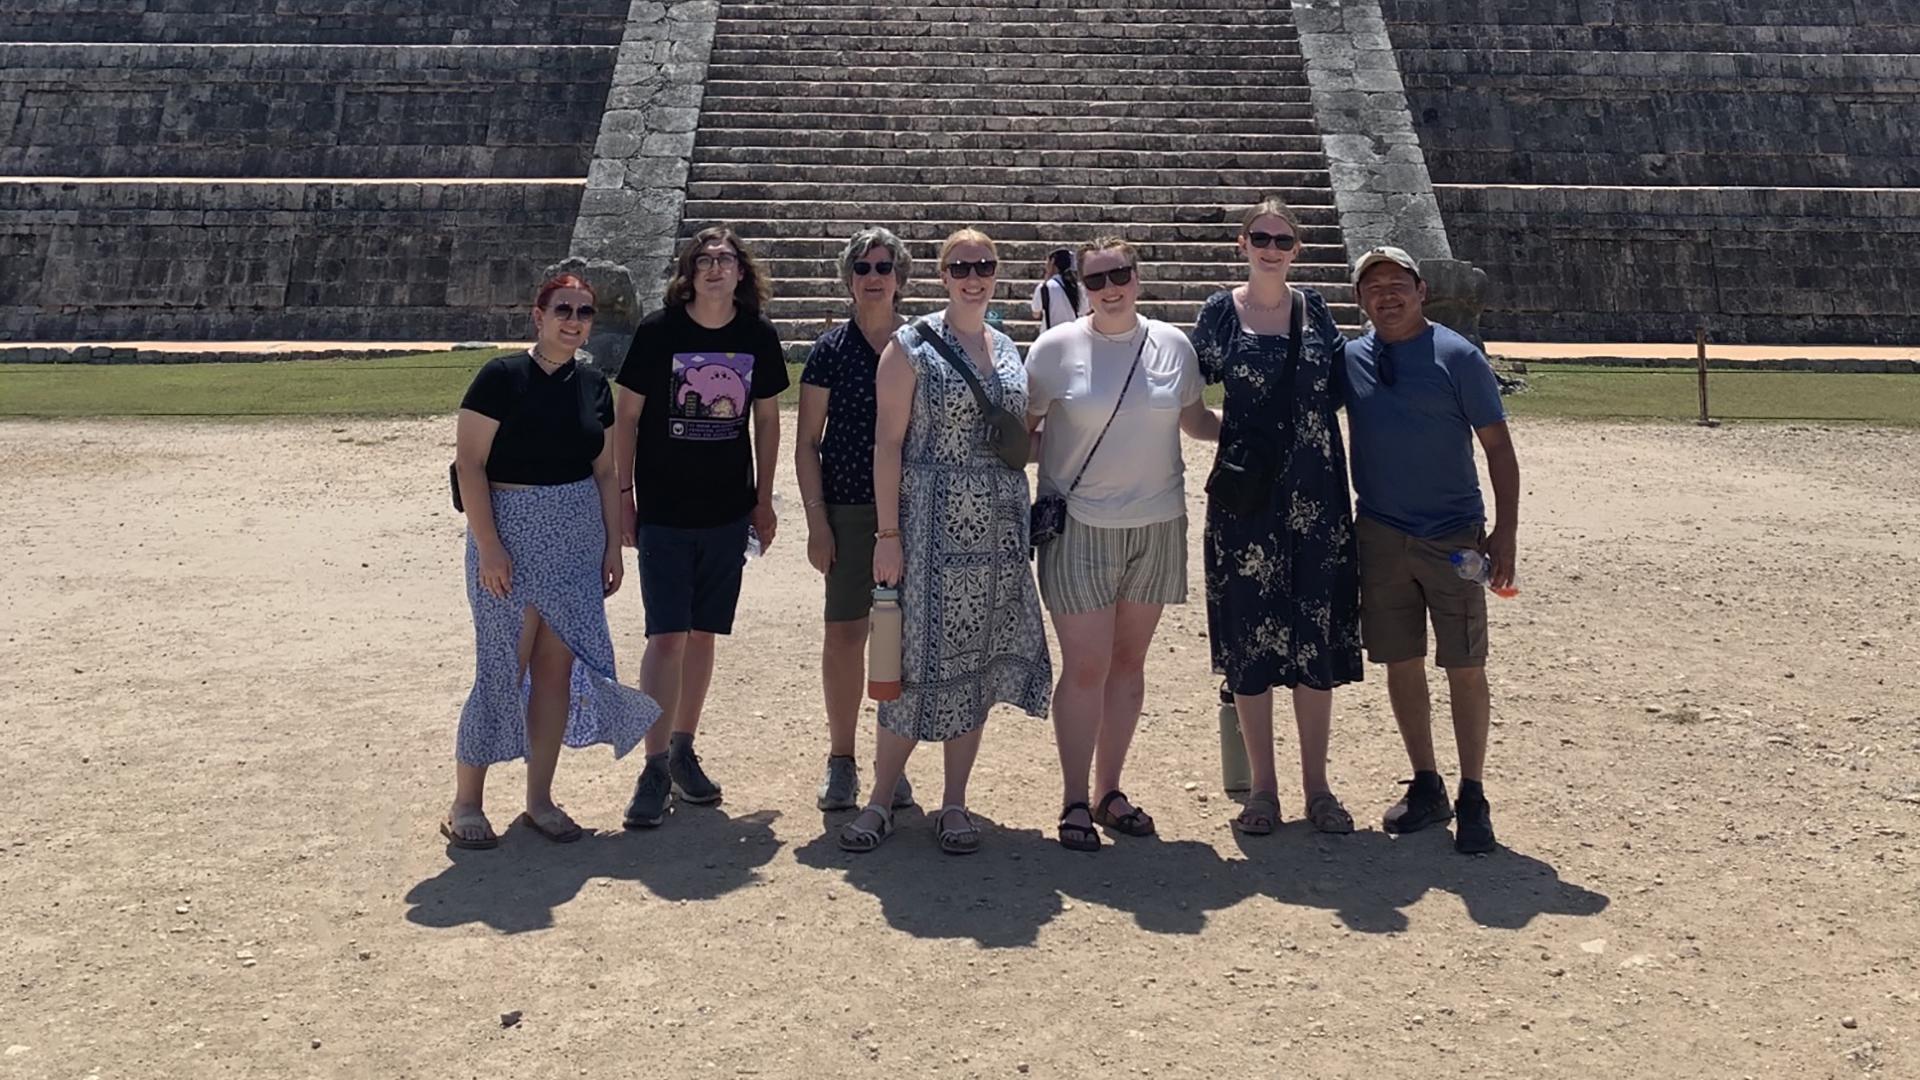 Faculty and students posing for a photo on a Spanish trip in front of El Castillo